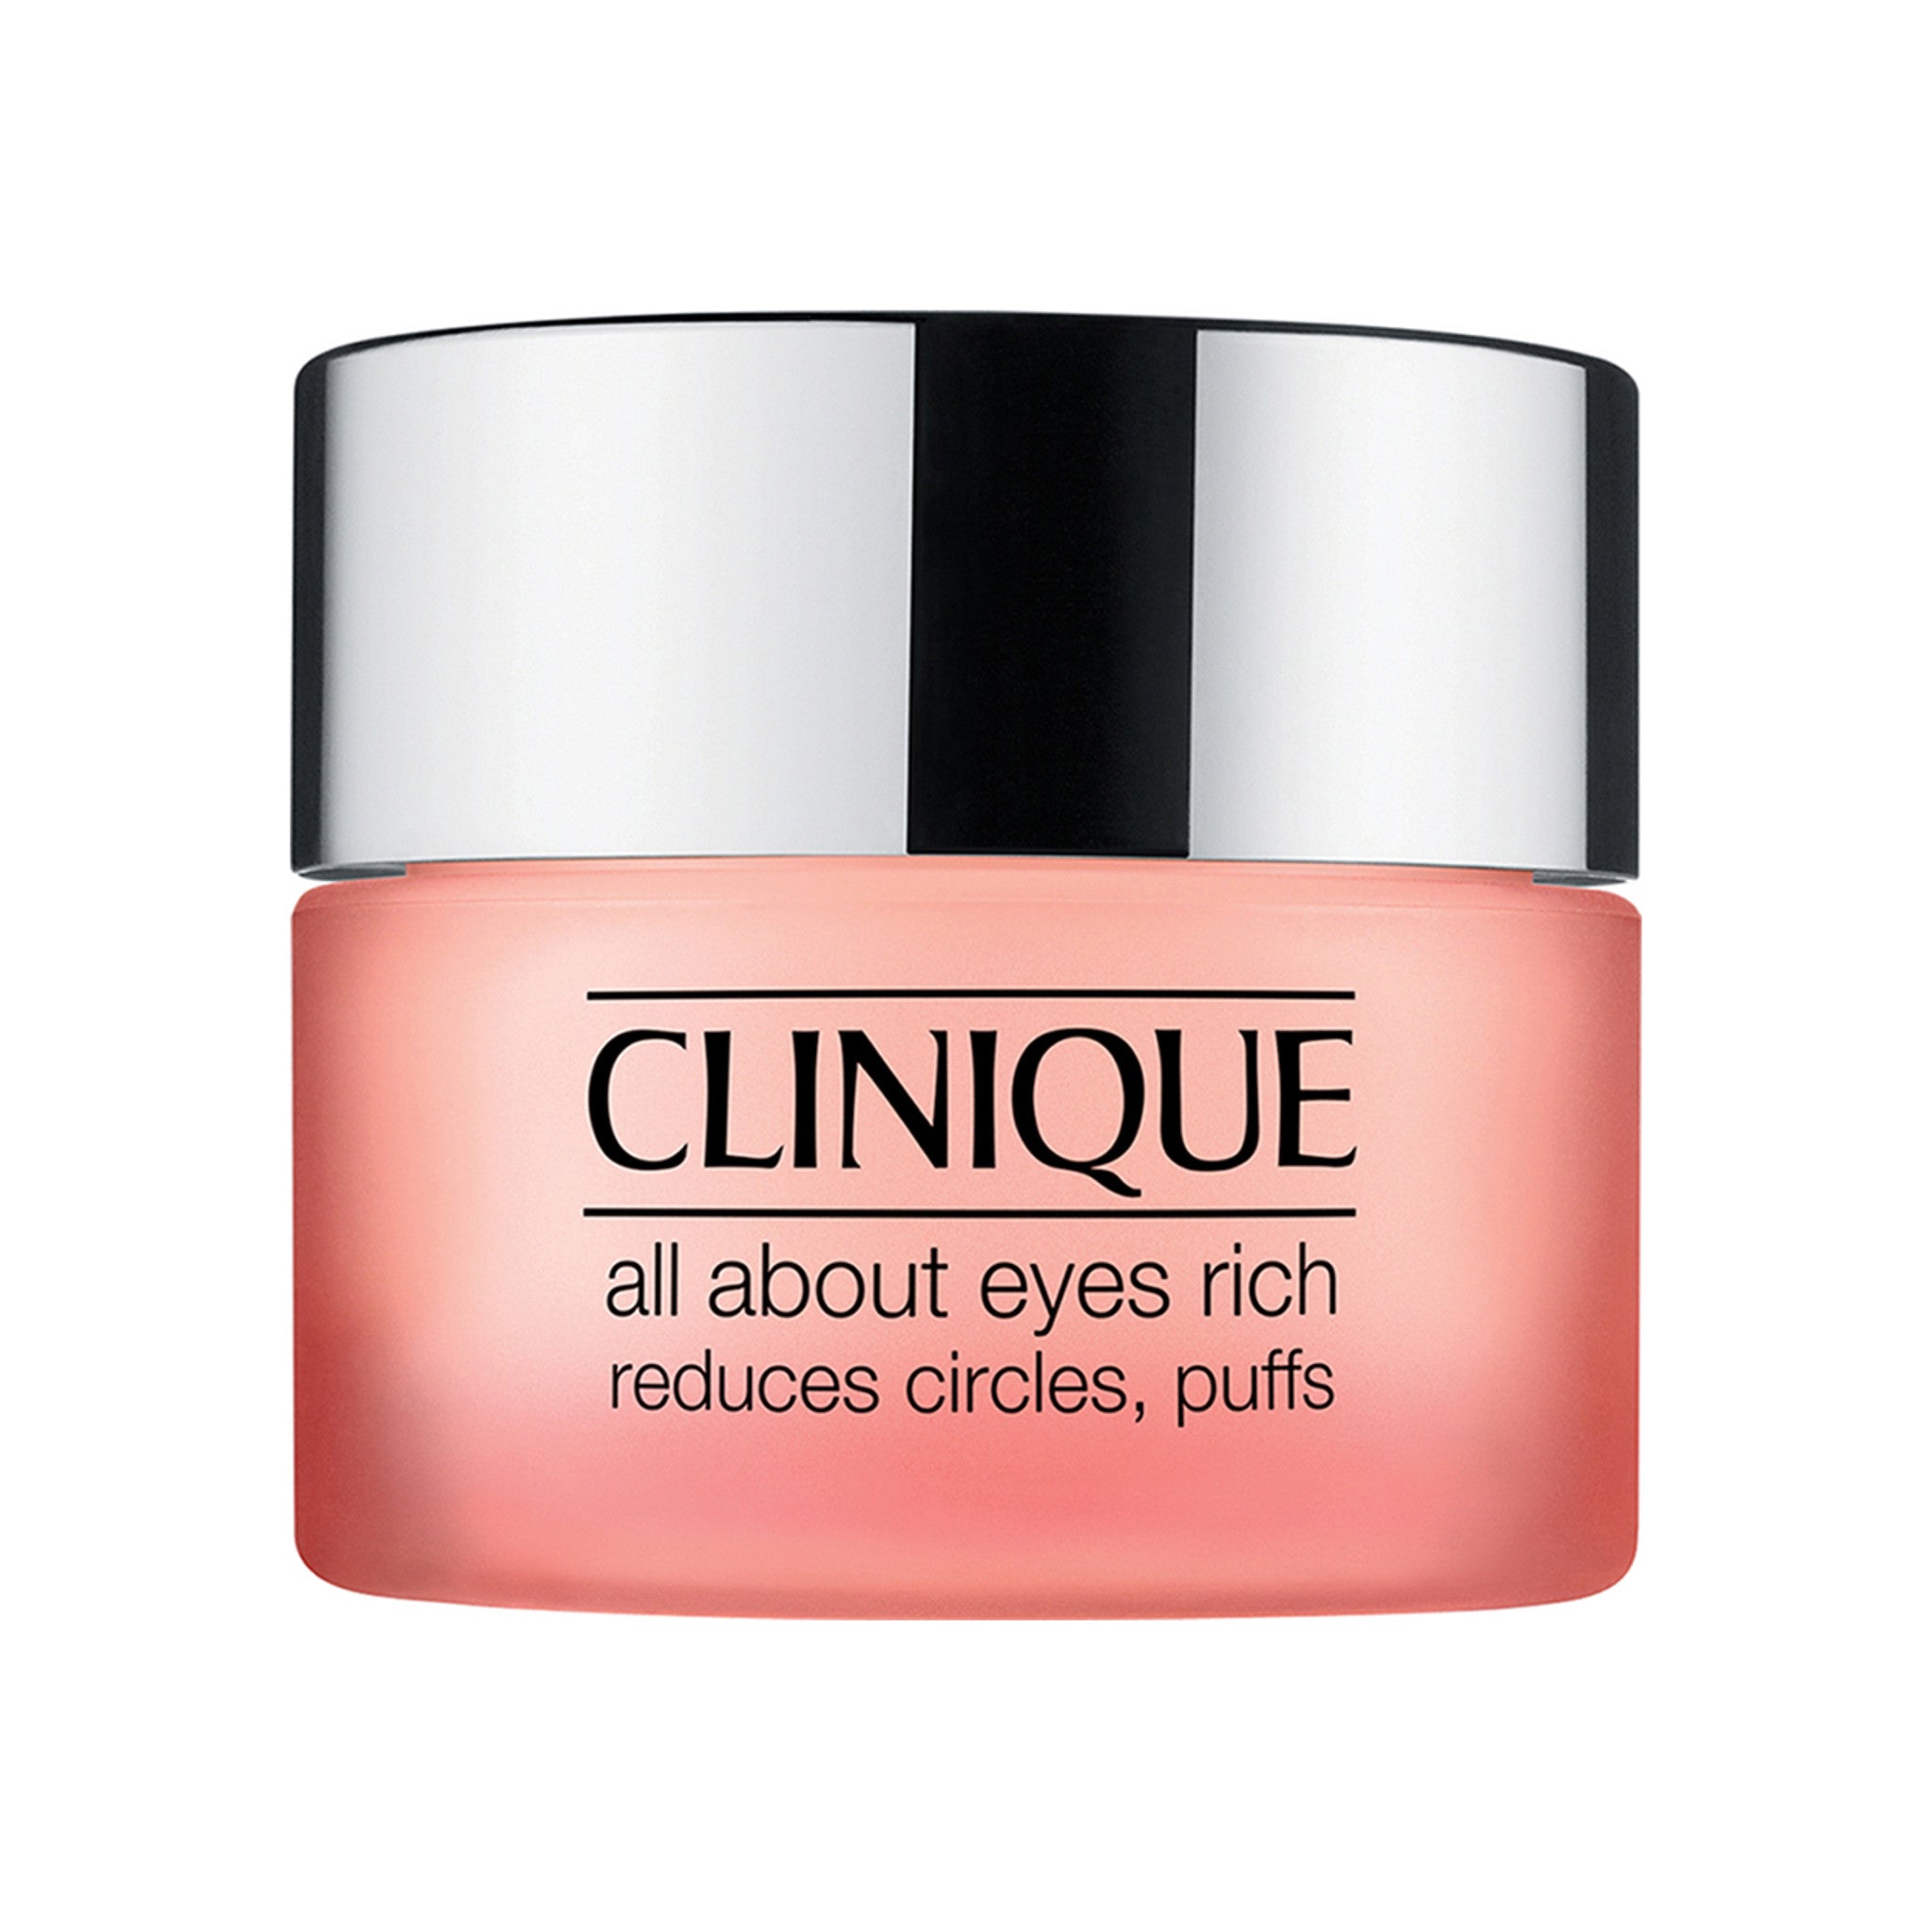 Clinique All About Eyes Rich Eye Cream Size variant: 0.5 Oz main image.